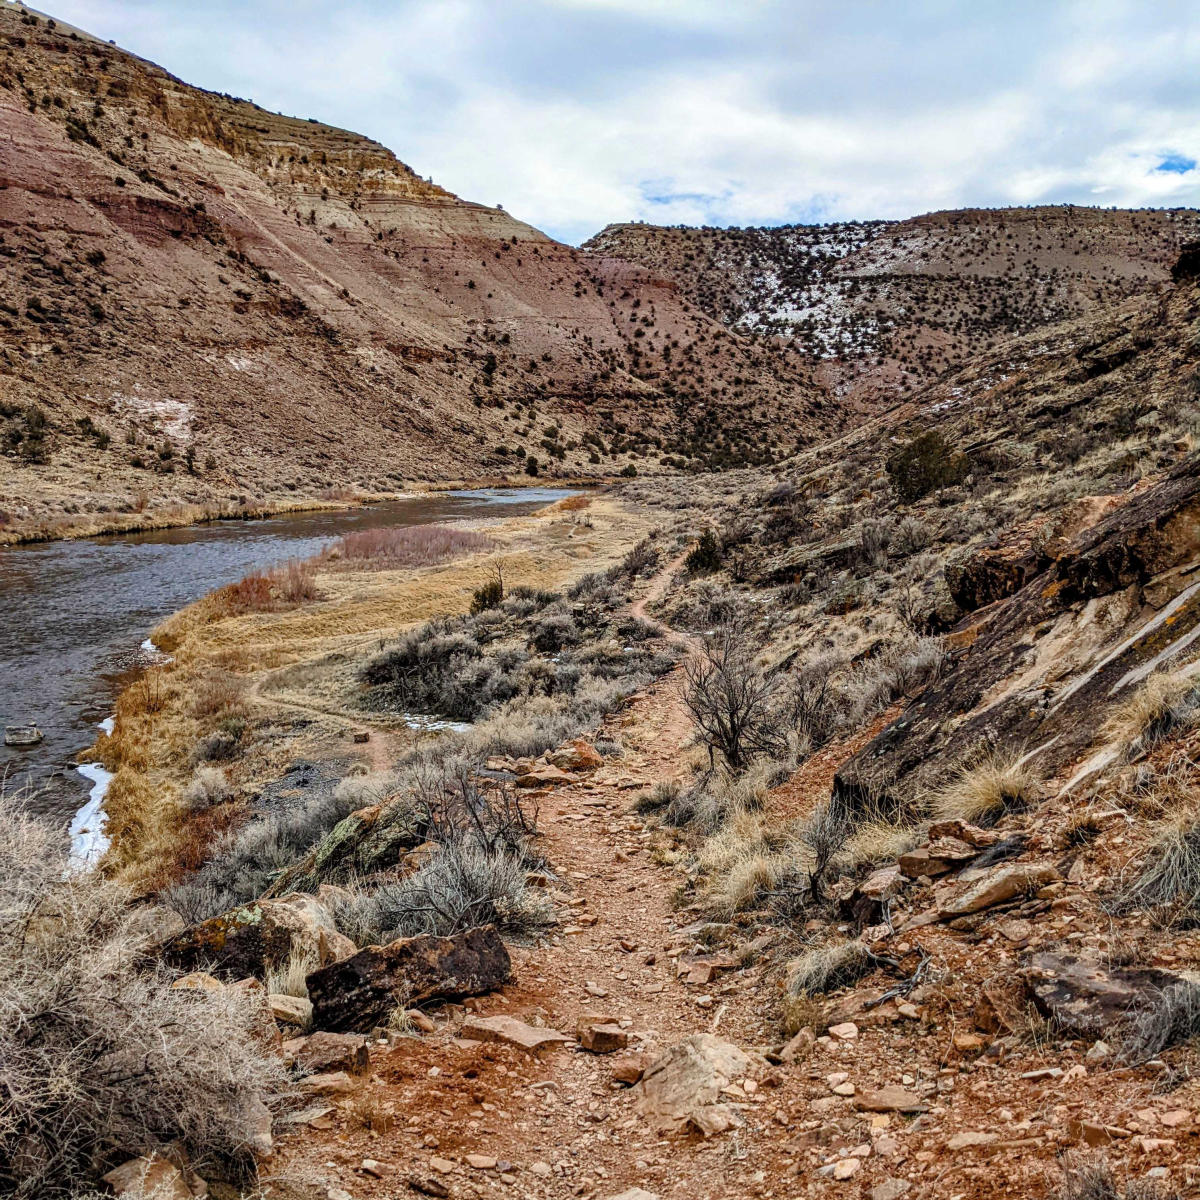 A dirt and rocky trail sits above the Gunnison River and leads deeper into the canyon with sage brush and shrubbery on both sides.